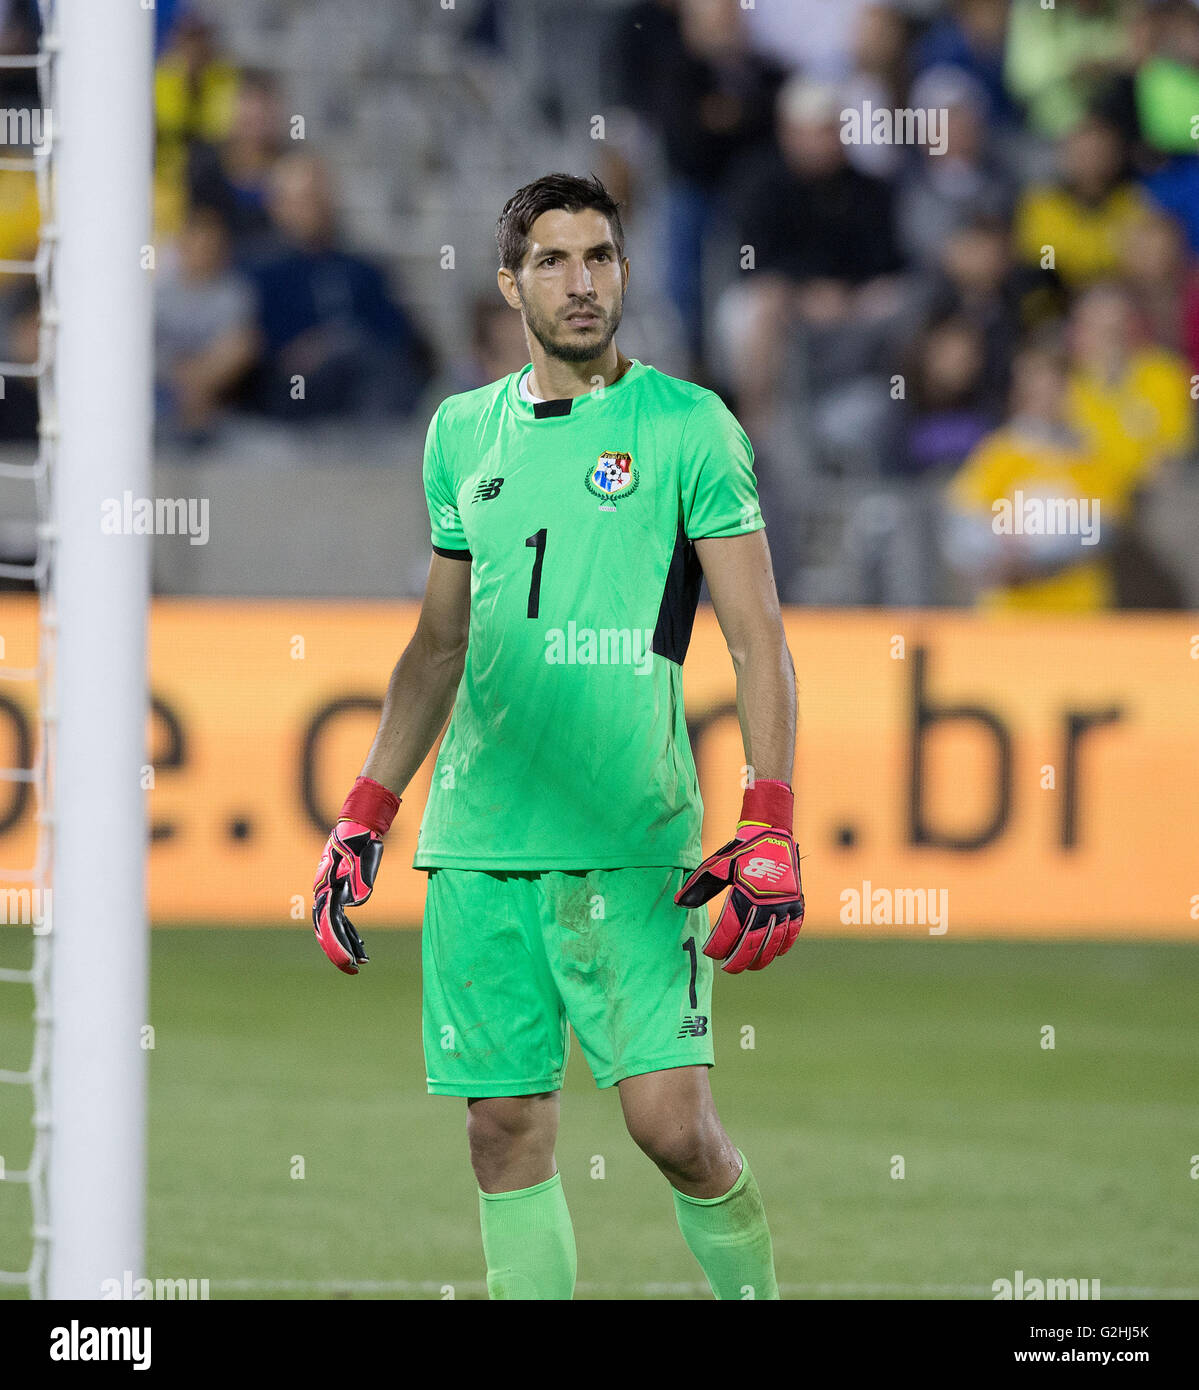 Commerce City, Colorado, USA. 29th May, 2016. Panama G JAIME PENEDO looks on before a corner kick to his goal during a friendly match against Panama before the Copa de Oro at Dicks Sporting Goods Park Sunday Evening. Brazil beats Panama 2-0. © Hector Acevedo/ZUMA Wire/Alamy Live News Stock Photo